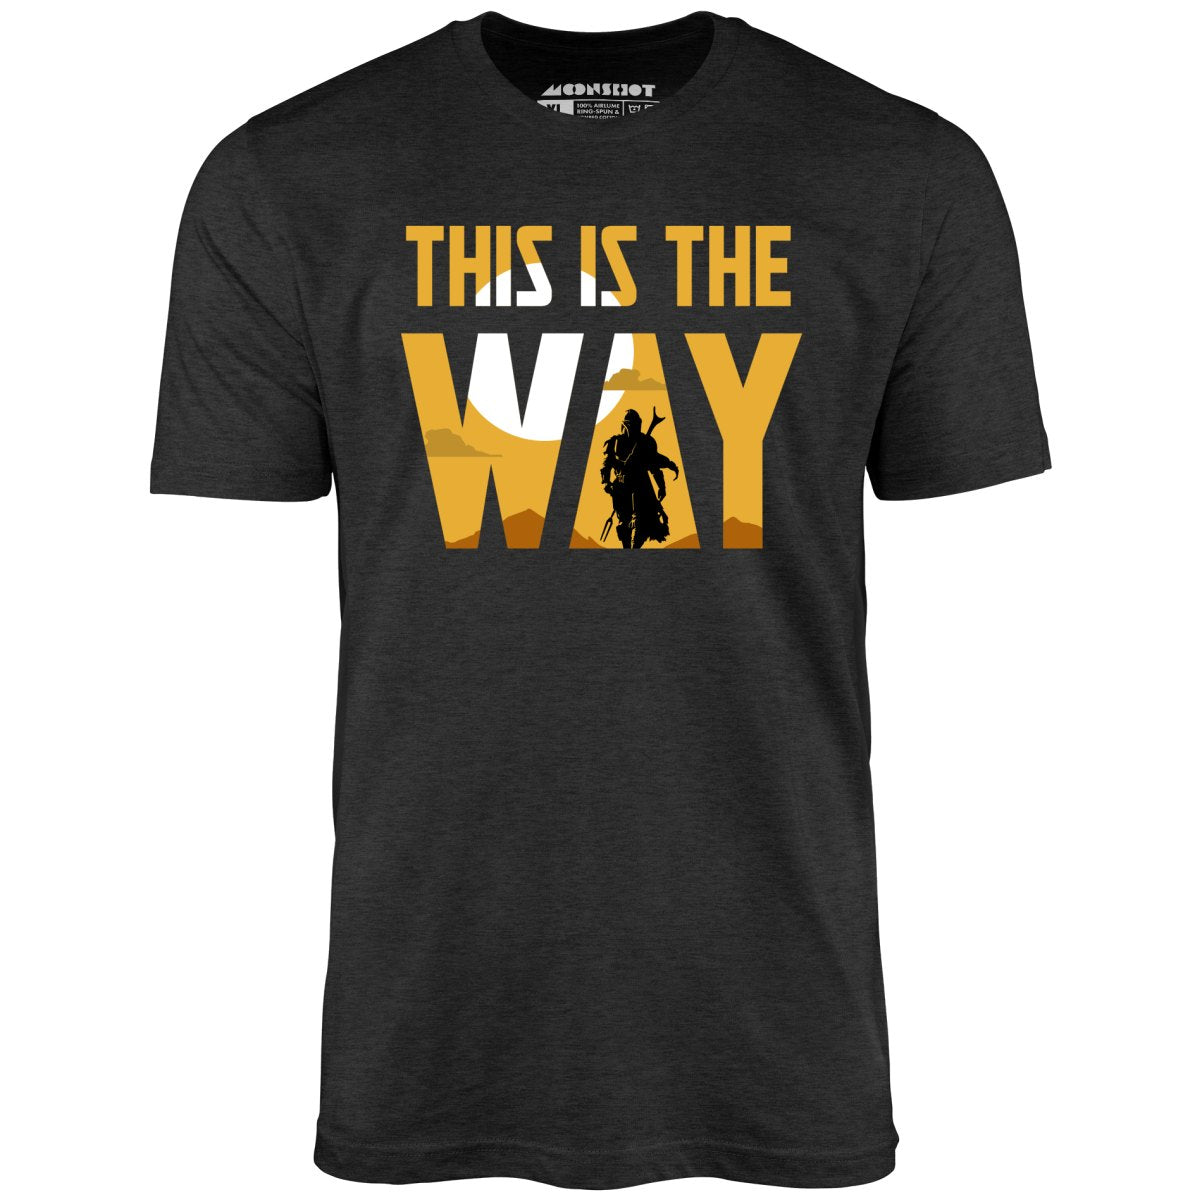 This is The Way - Unisex T-Shirt